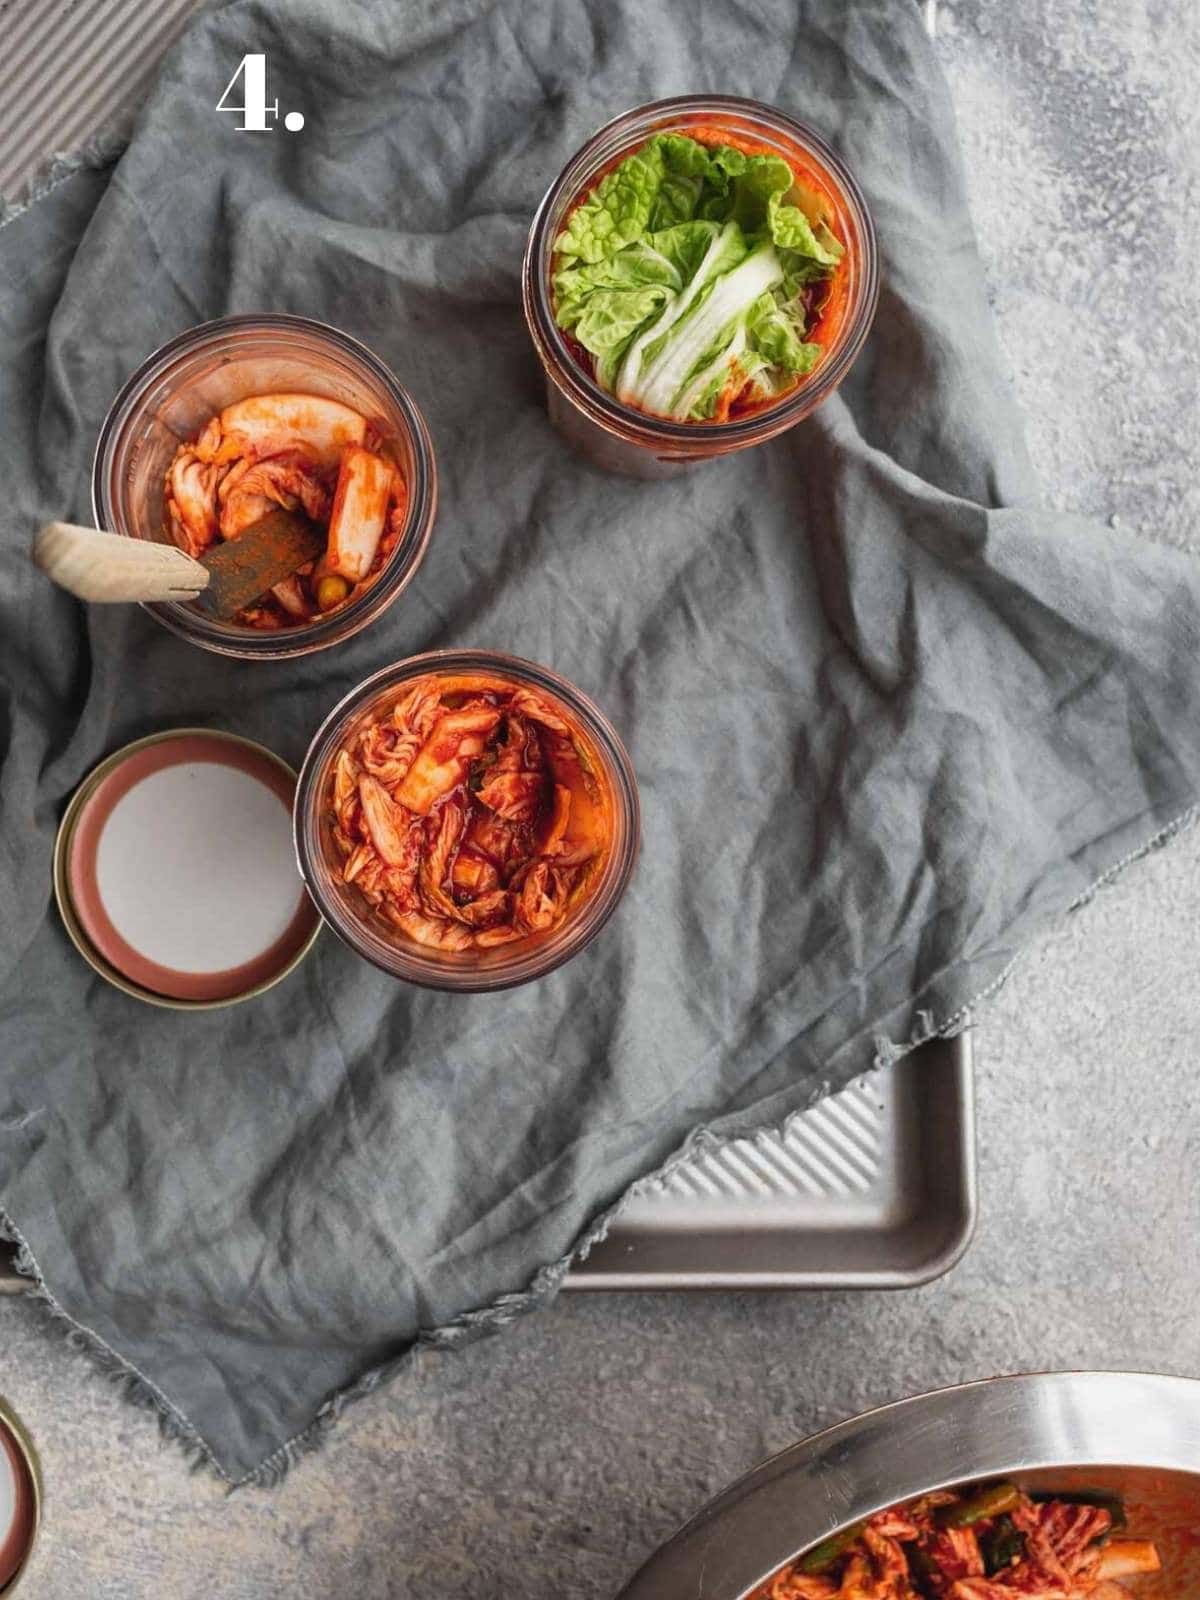 Kimchi being packed in to jars.